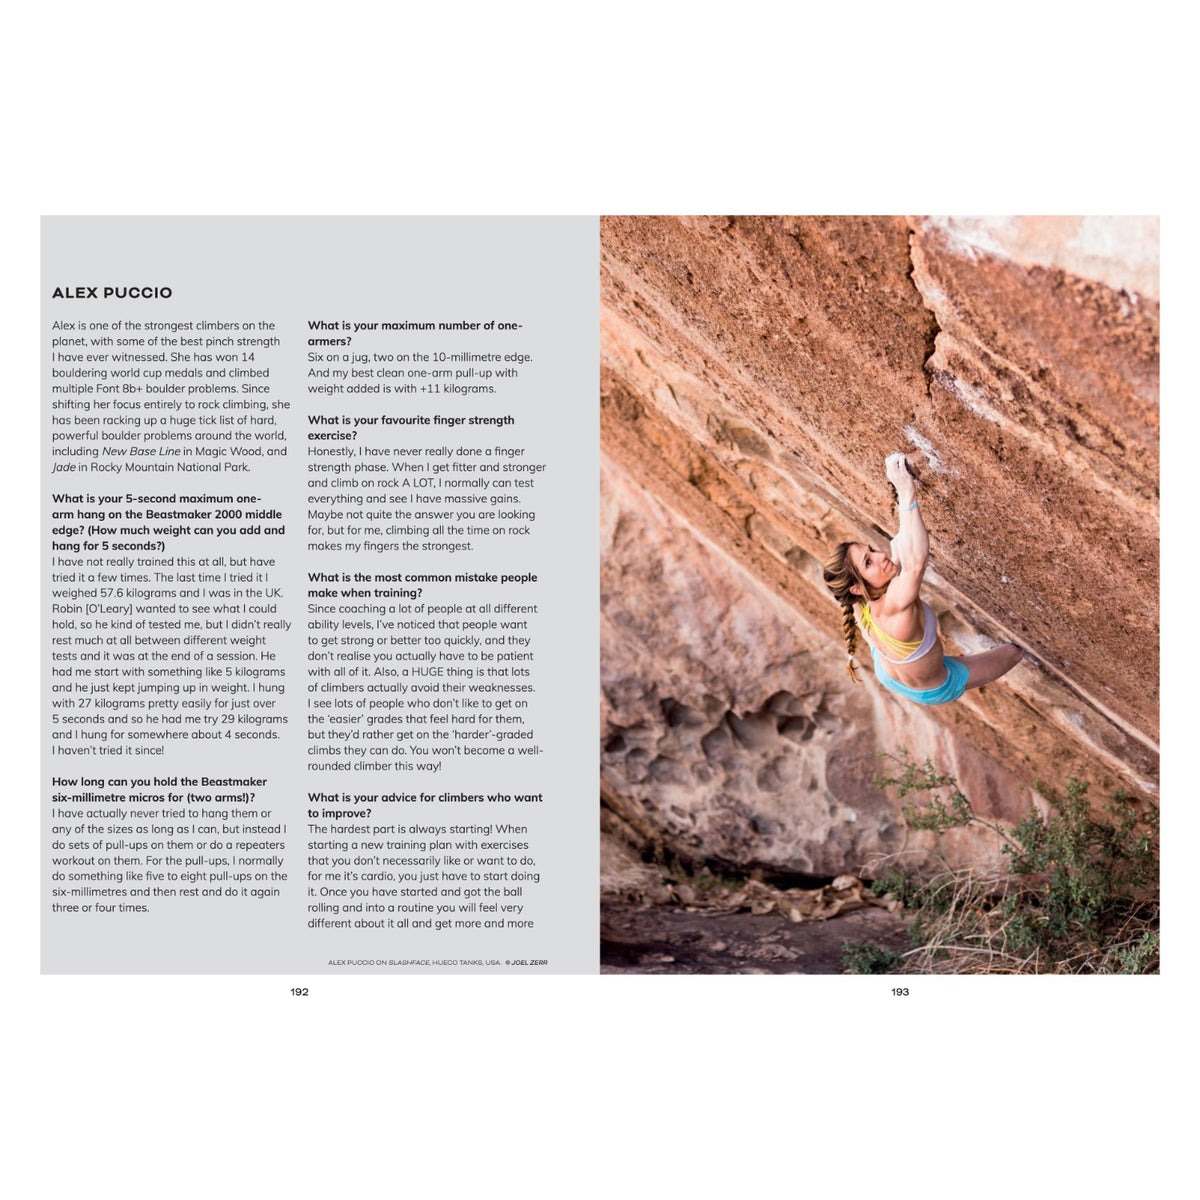 Beastmaking pro tips by Alex Puccio